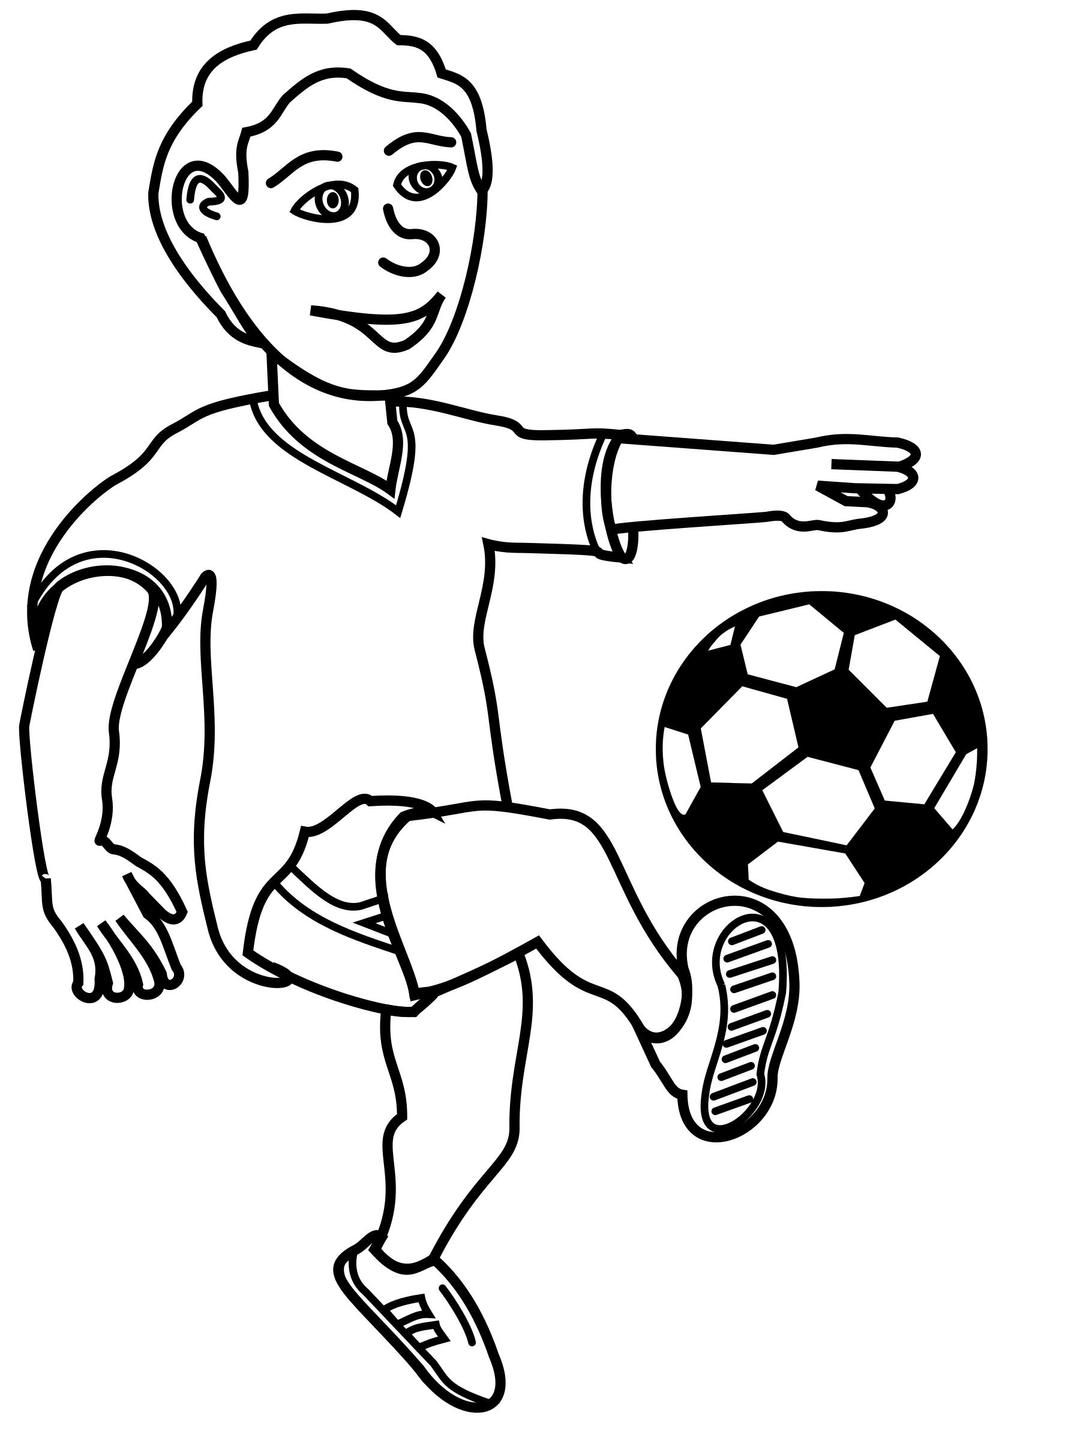 Soccer playing boy png transparent